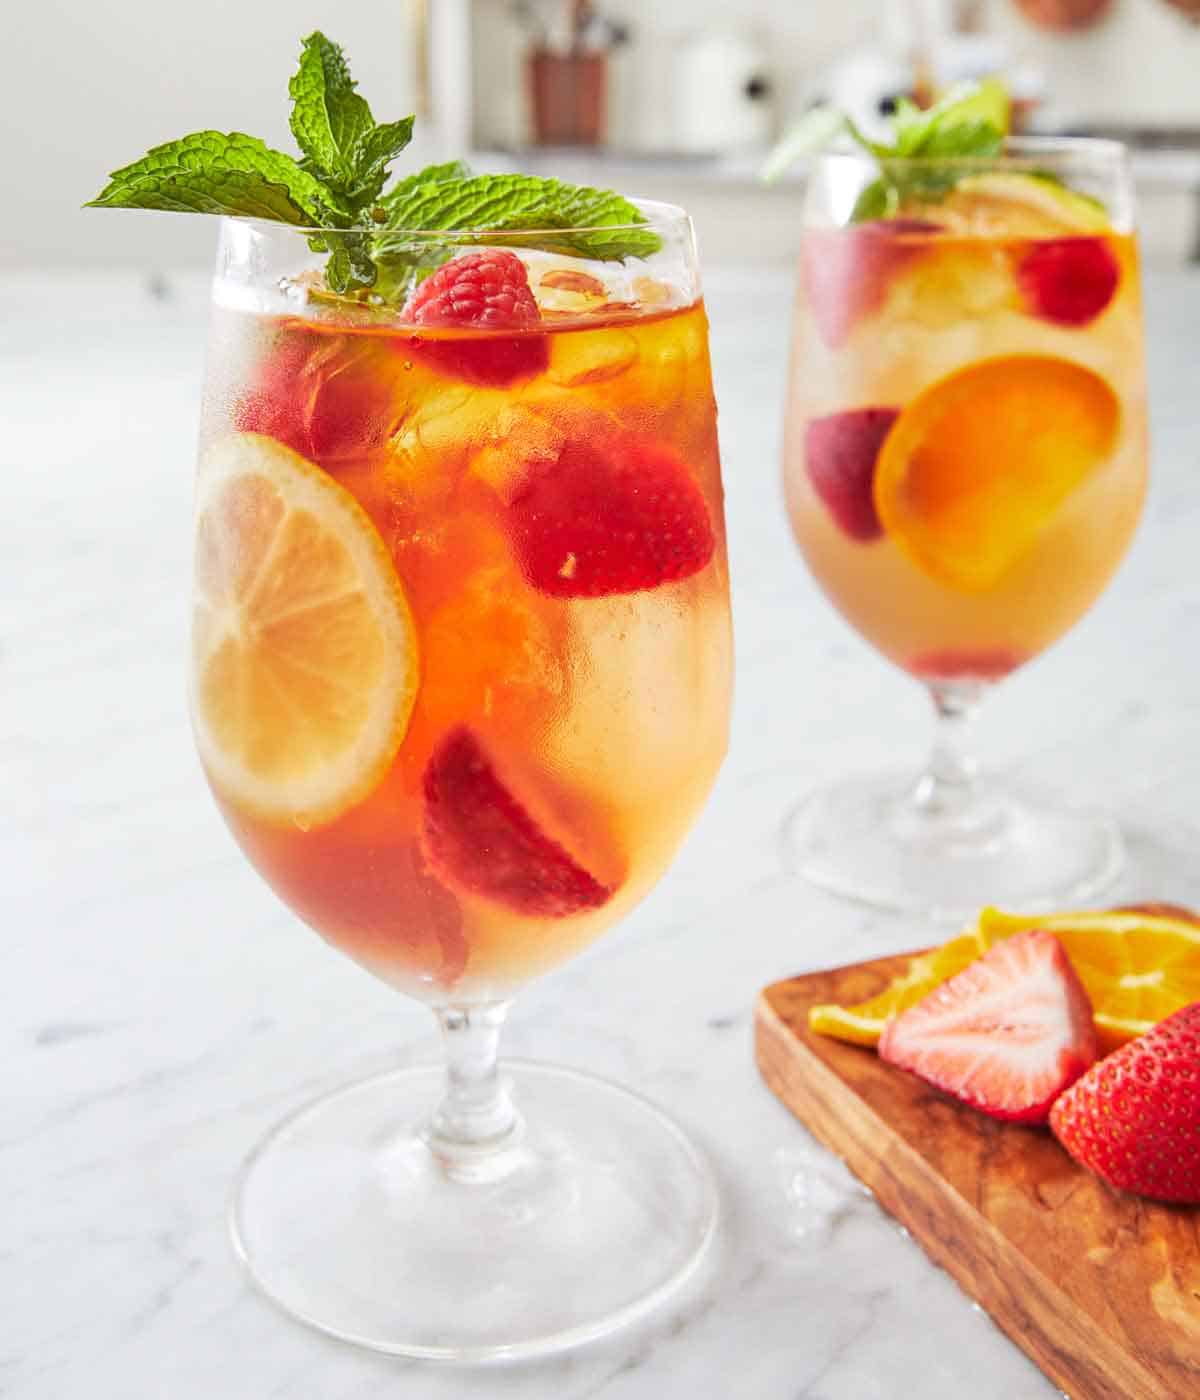 Two glasses of rose sangria with fresh mint on top. A small cutting board with sliced strawberries and oranges on the side.